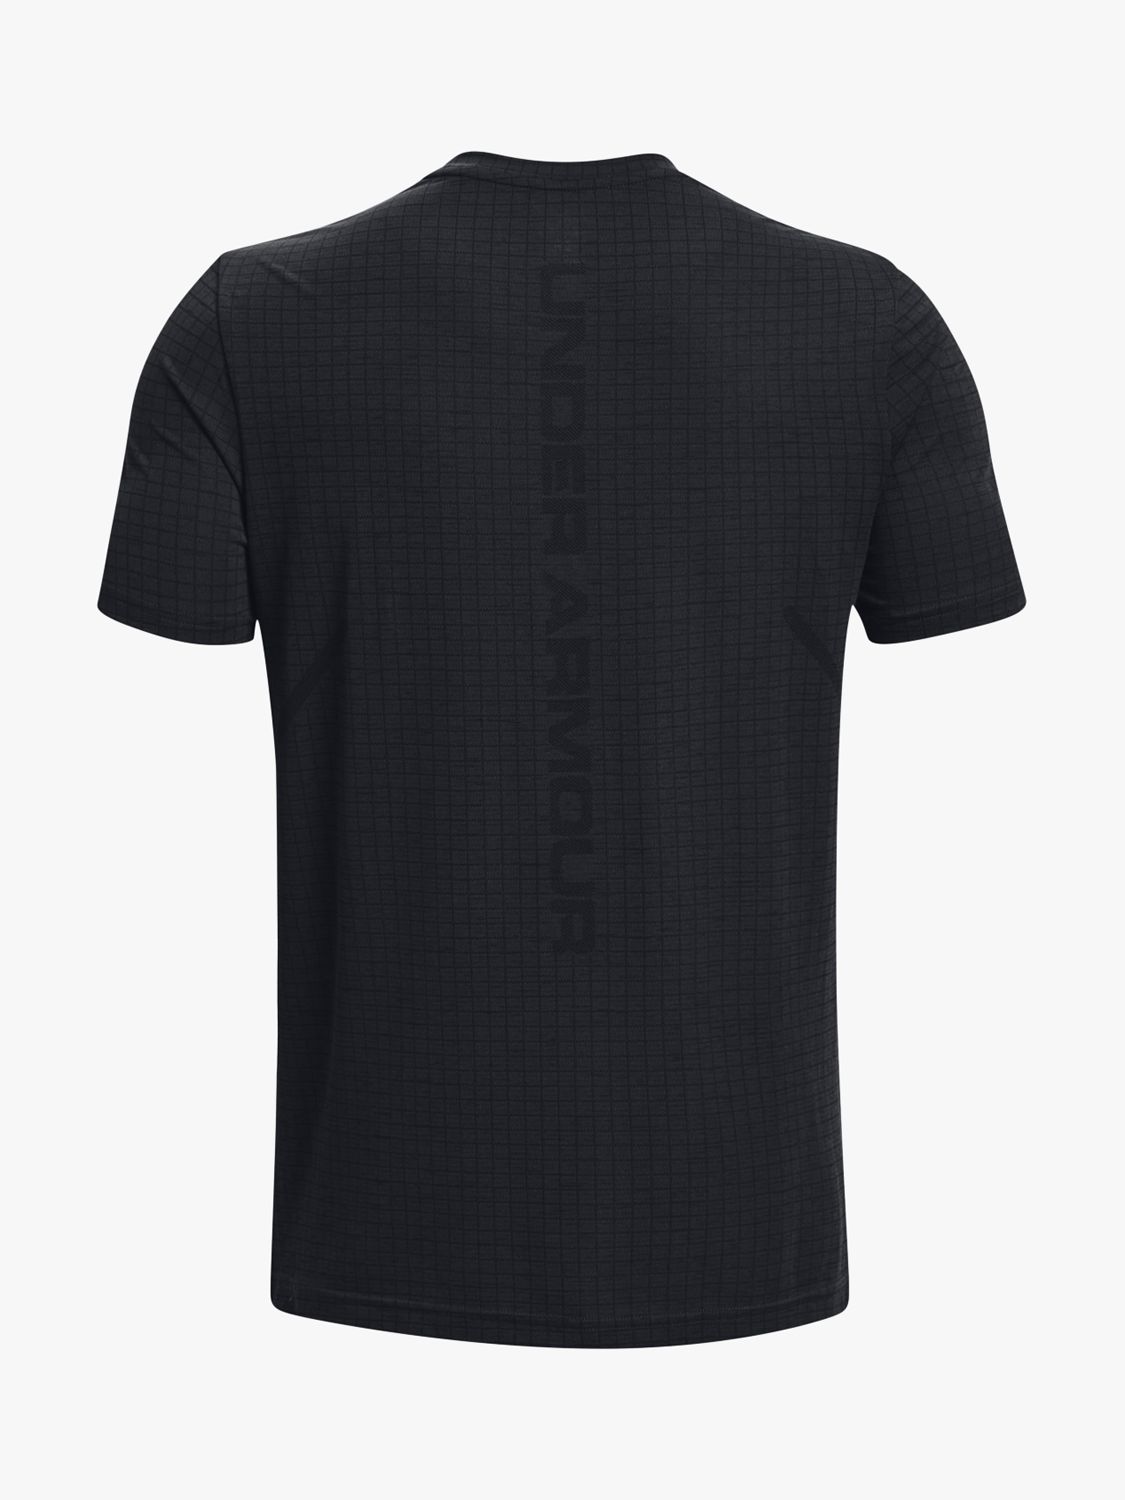 Buy Under Armour Seamless Grid Short Sleeve Gym Top Online at johnlewis.com